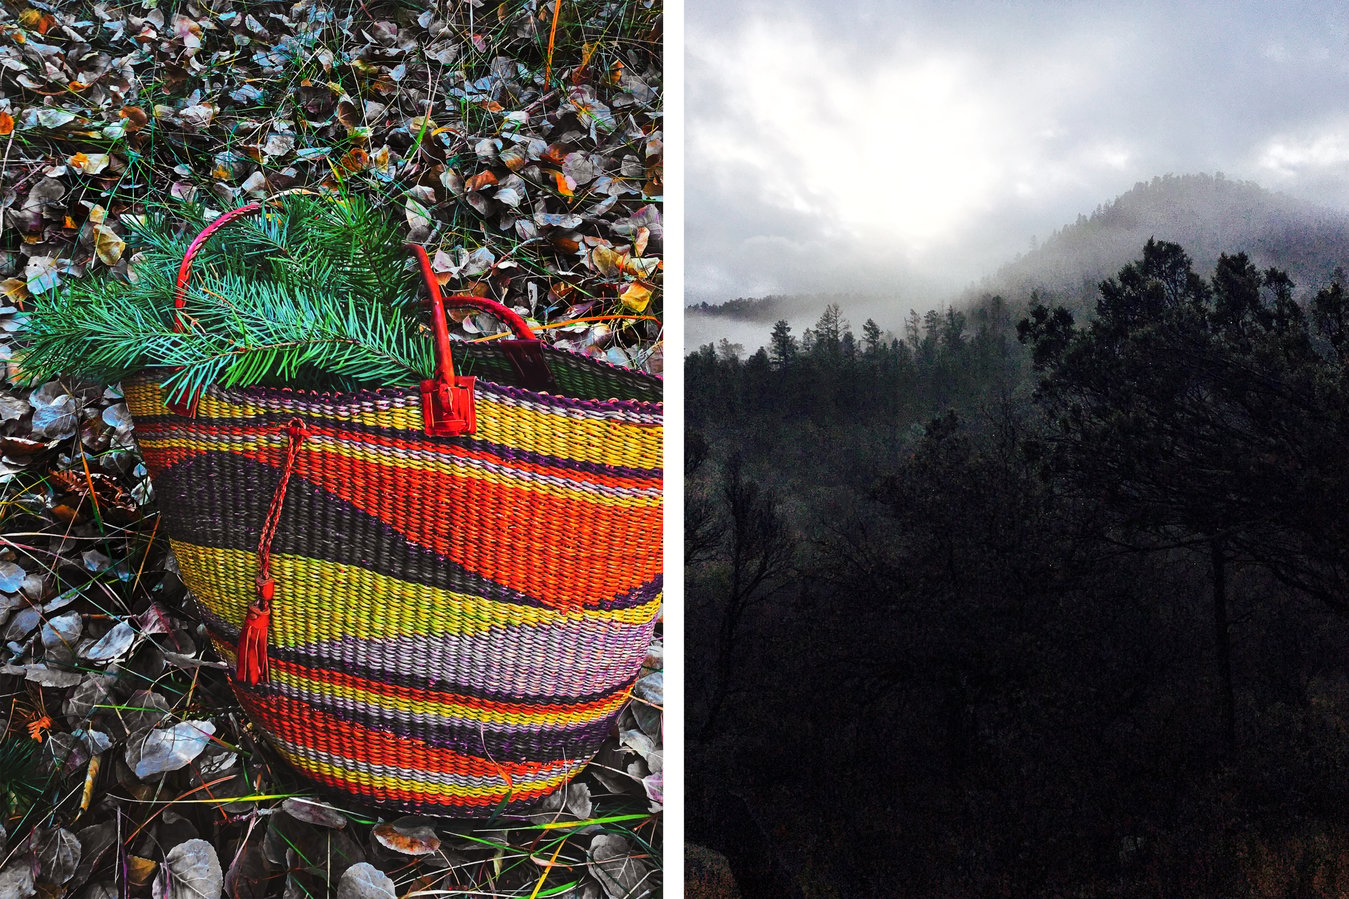 Two photos side by side. On the left is a colorful woven basket with wildharvested plants. On the right is a photo of the Gila Wilderness. Photos by Kiva Rose Hardin.